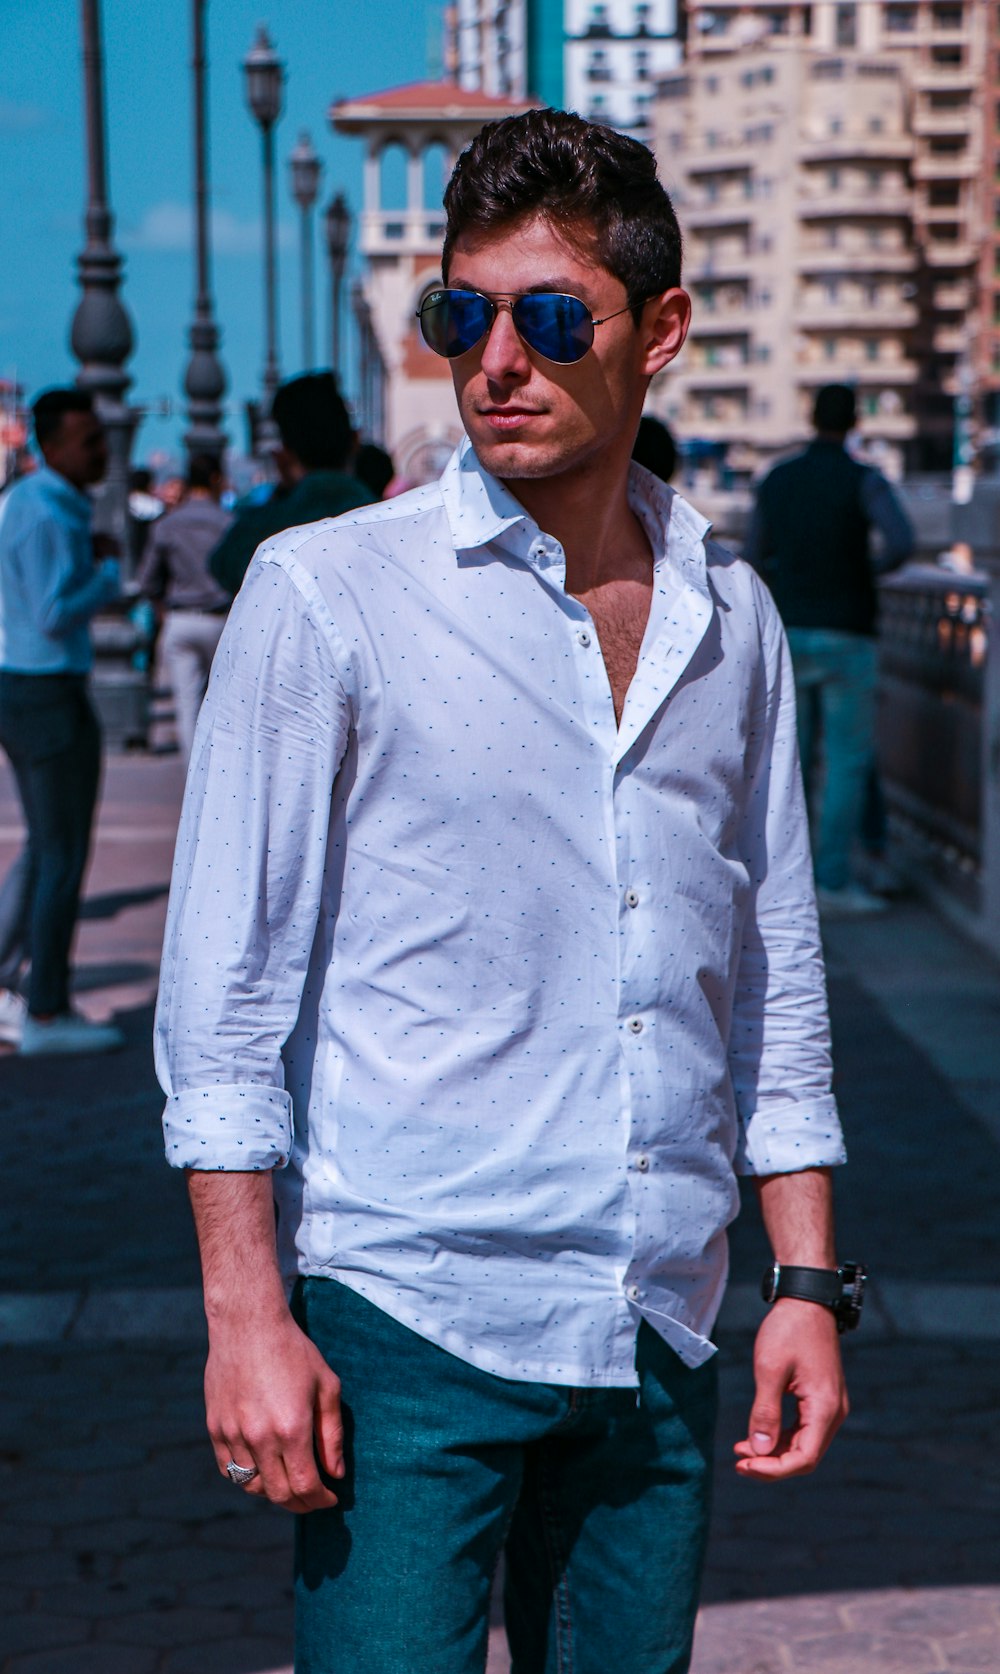 man in blue dress shirt and blue denim jeans wearing sunglasses standing on sidewalk during daytime